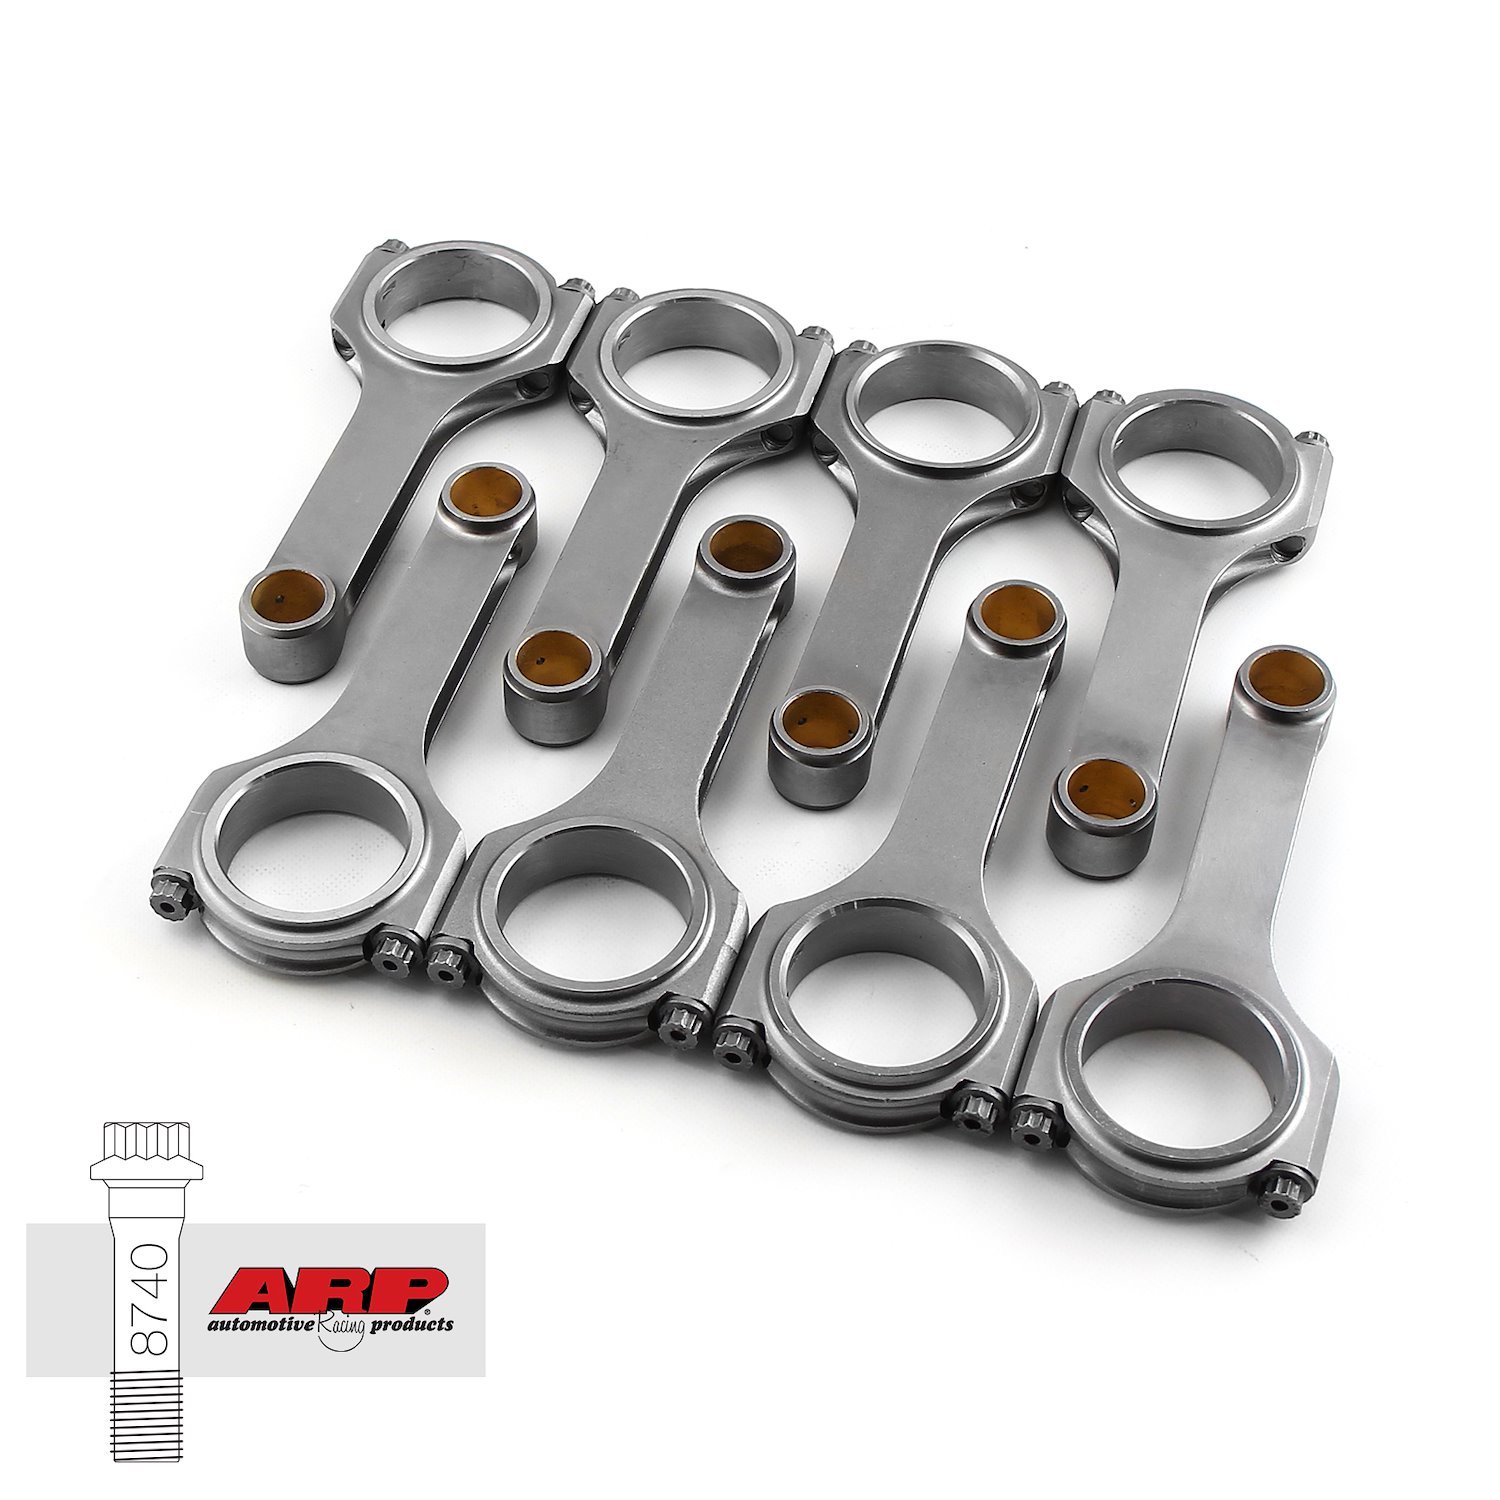 H BEAM 6.385 2.200 .990 4340 CONNECTING RODS